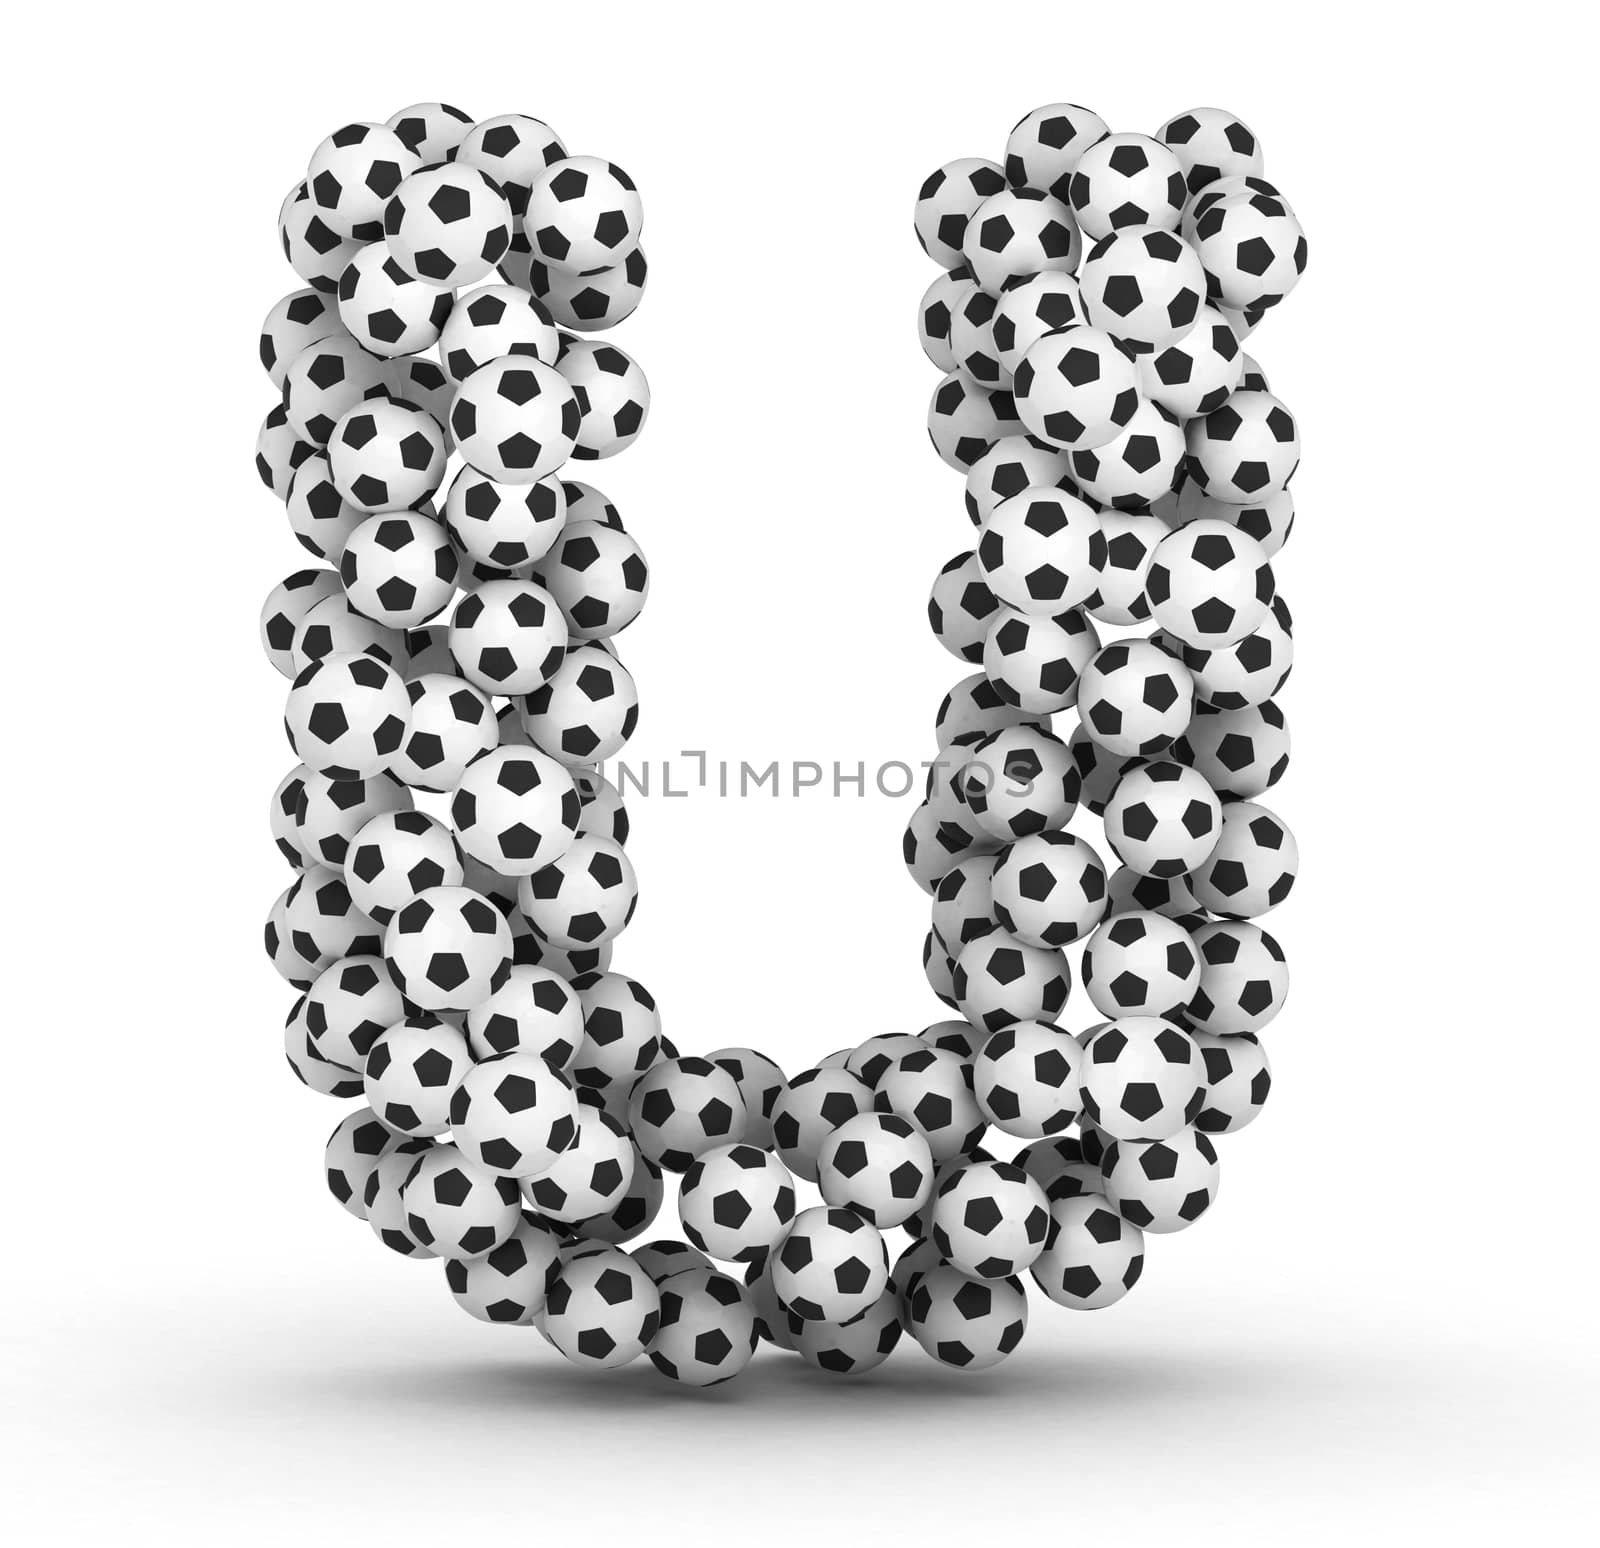 Letter U from soccer football balls by iunewind